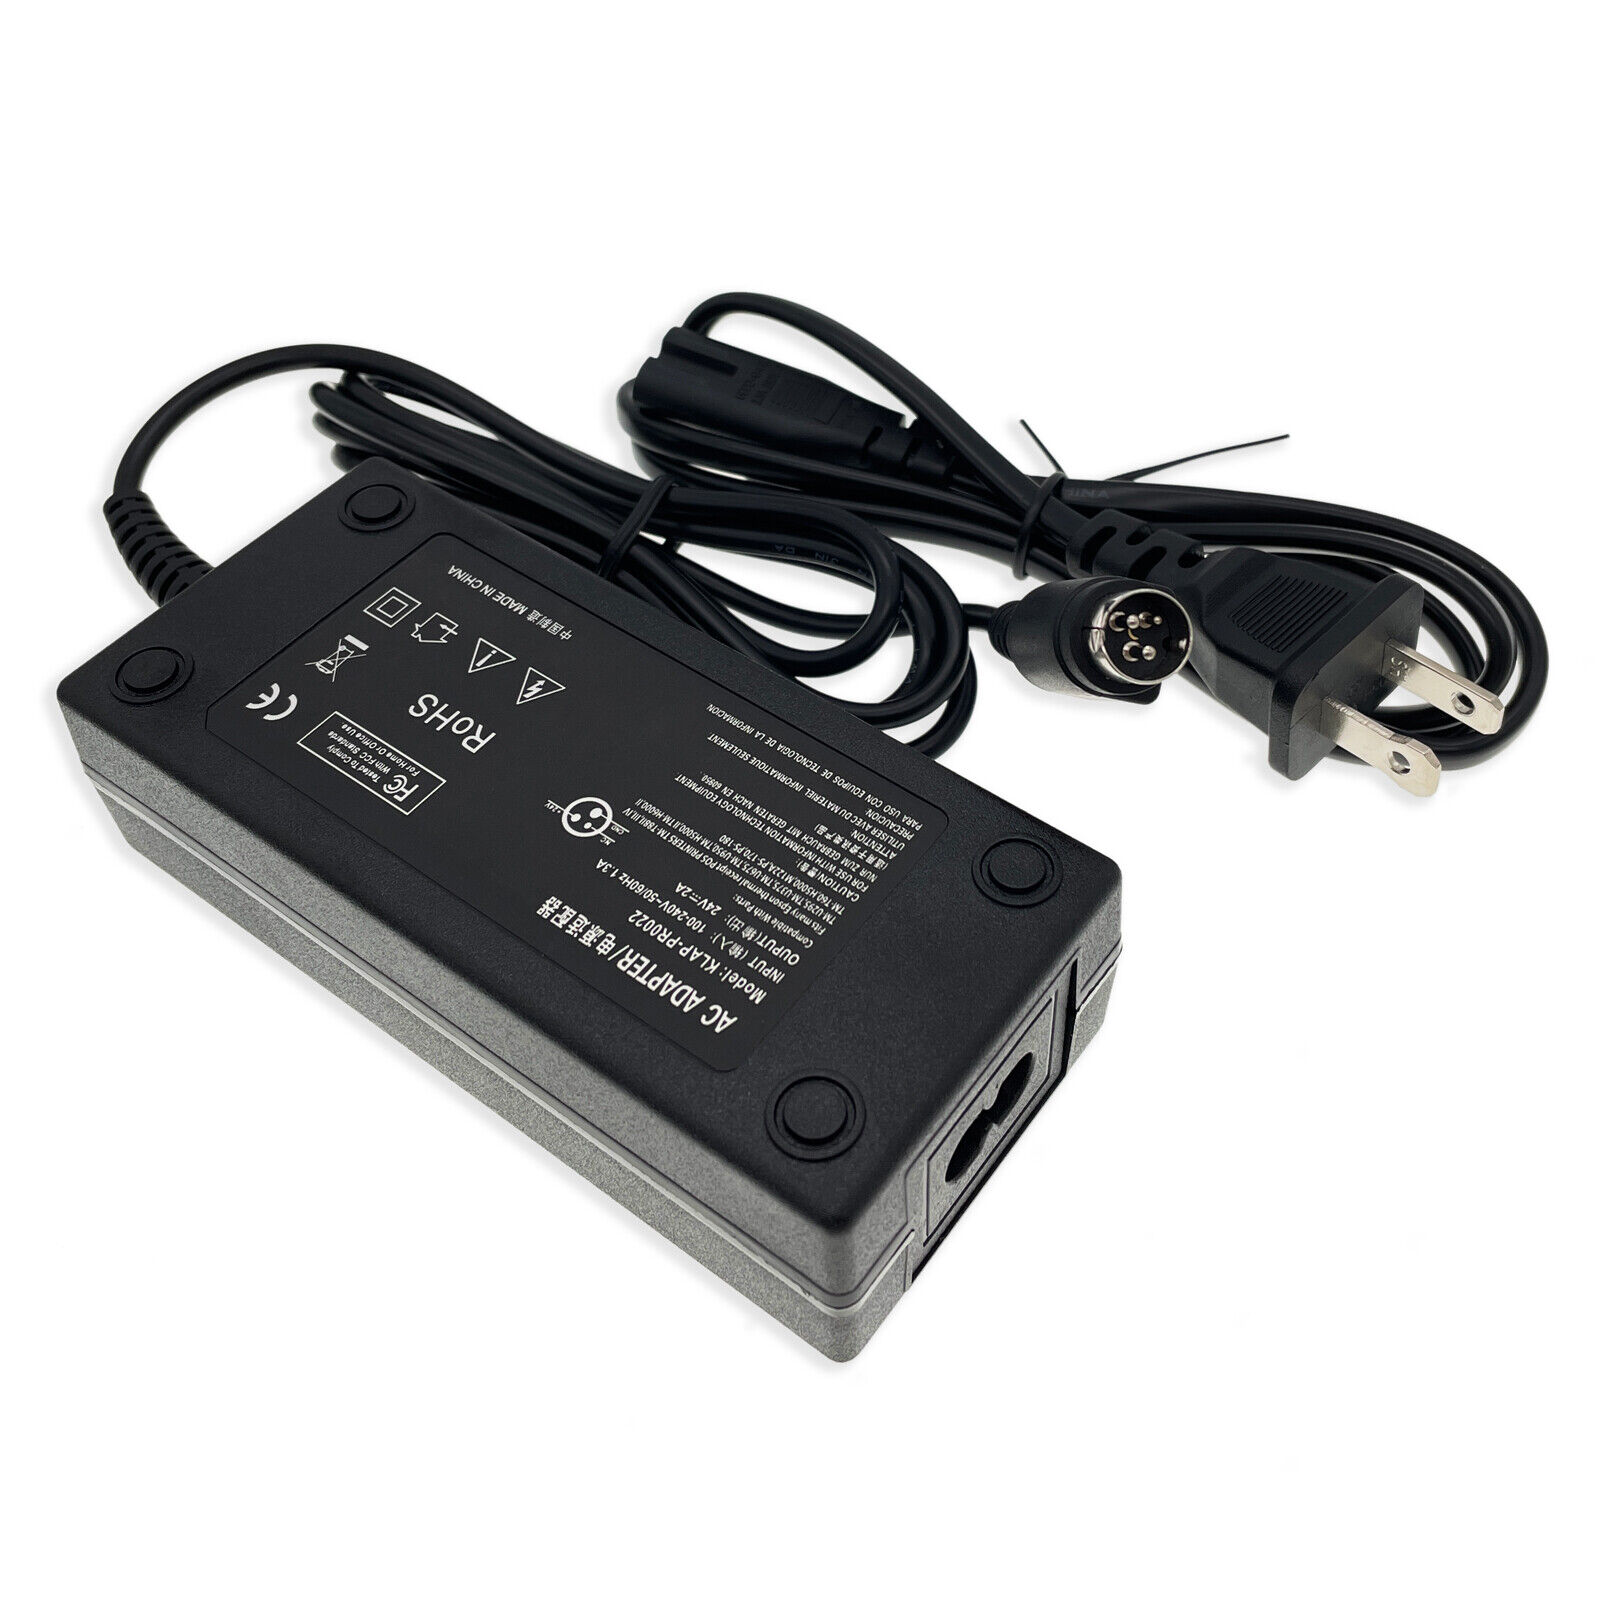 New AC Adapter For Epson M235A Thermal Receipt POS Printer Charger Power Supply